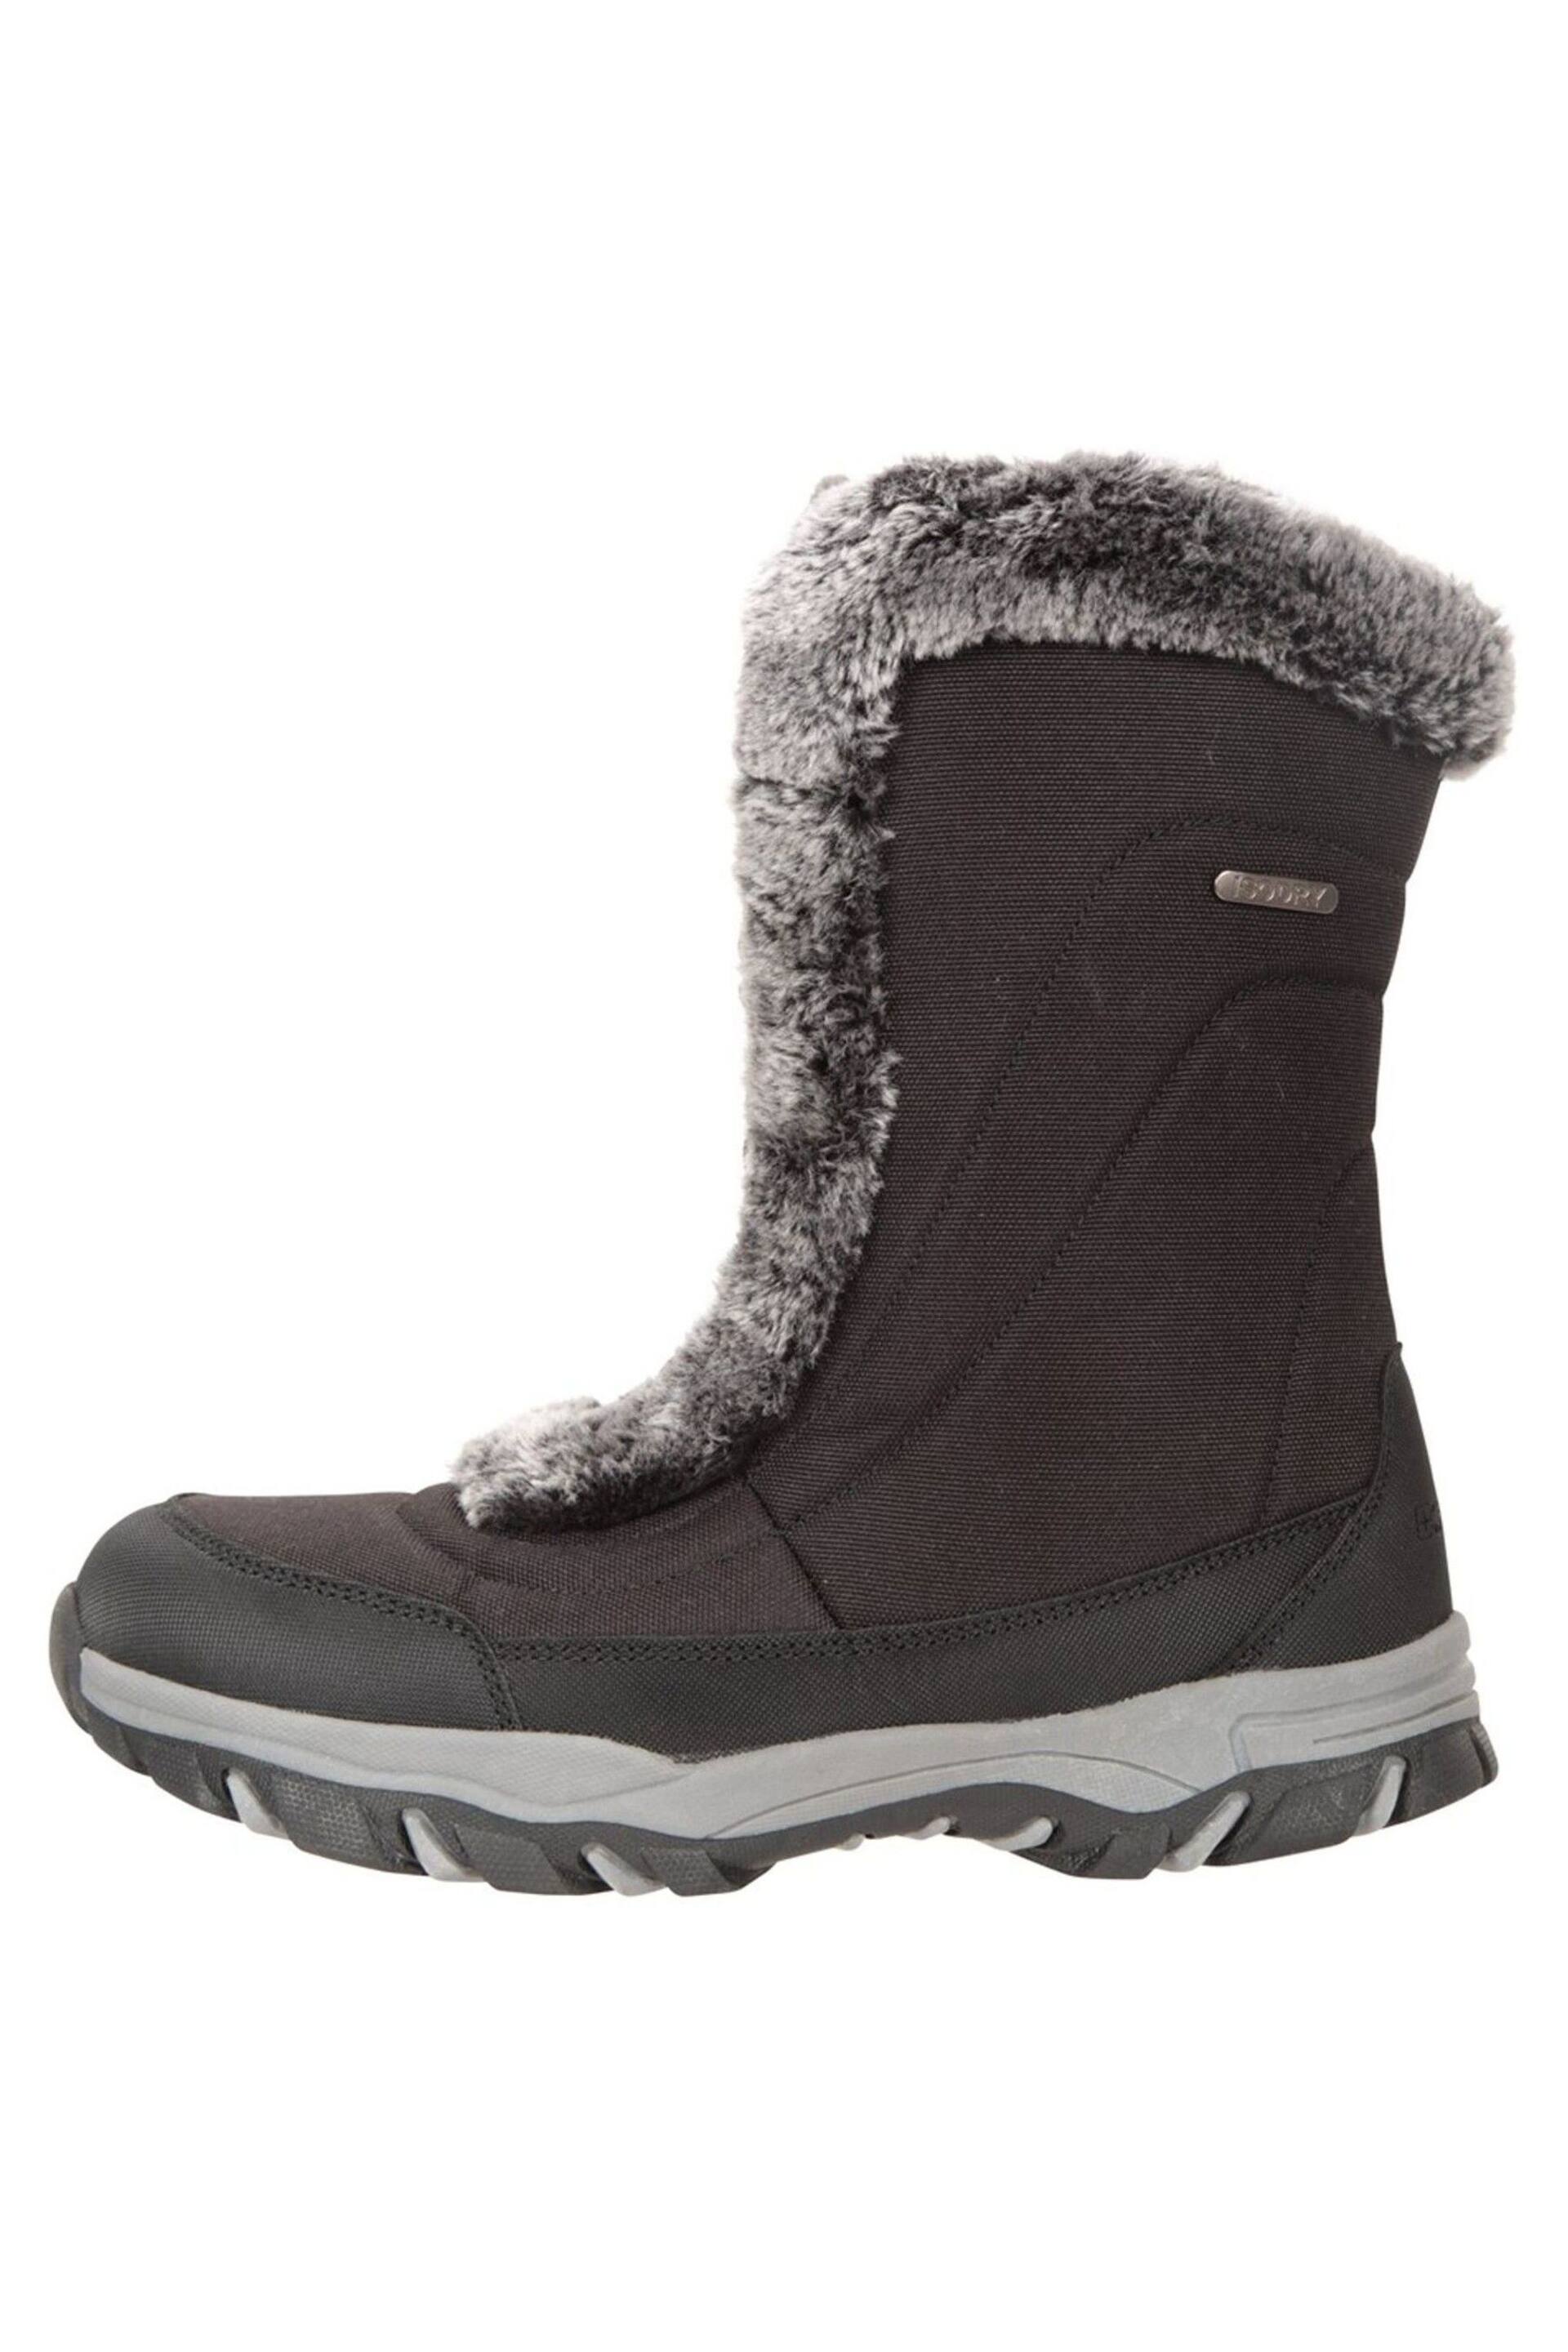 Mountain Warehouse Black Womens Ohio Thermal Fleece Lined Snow Boots - Image 4 of 6